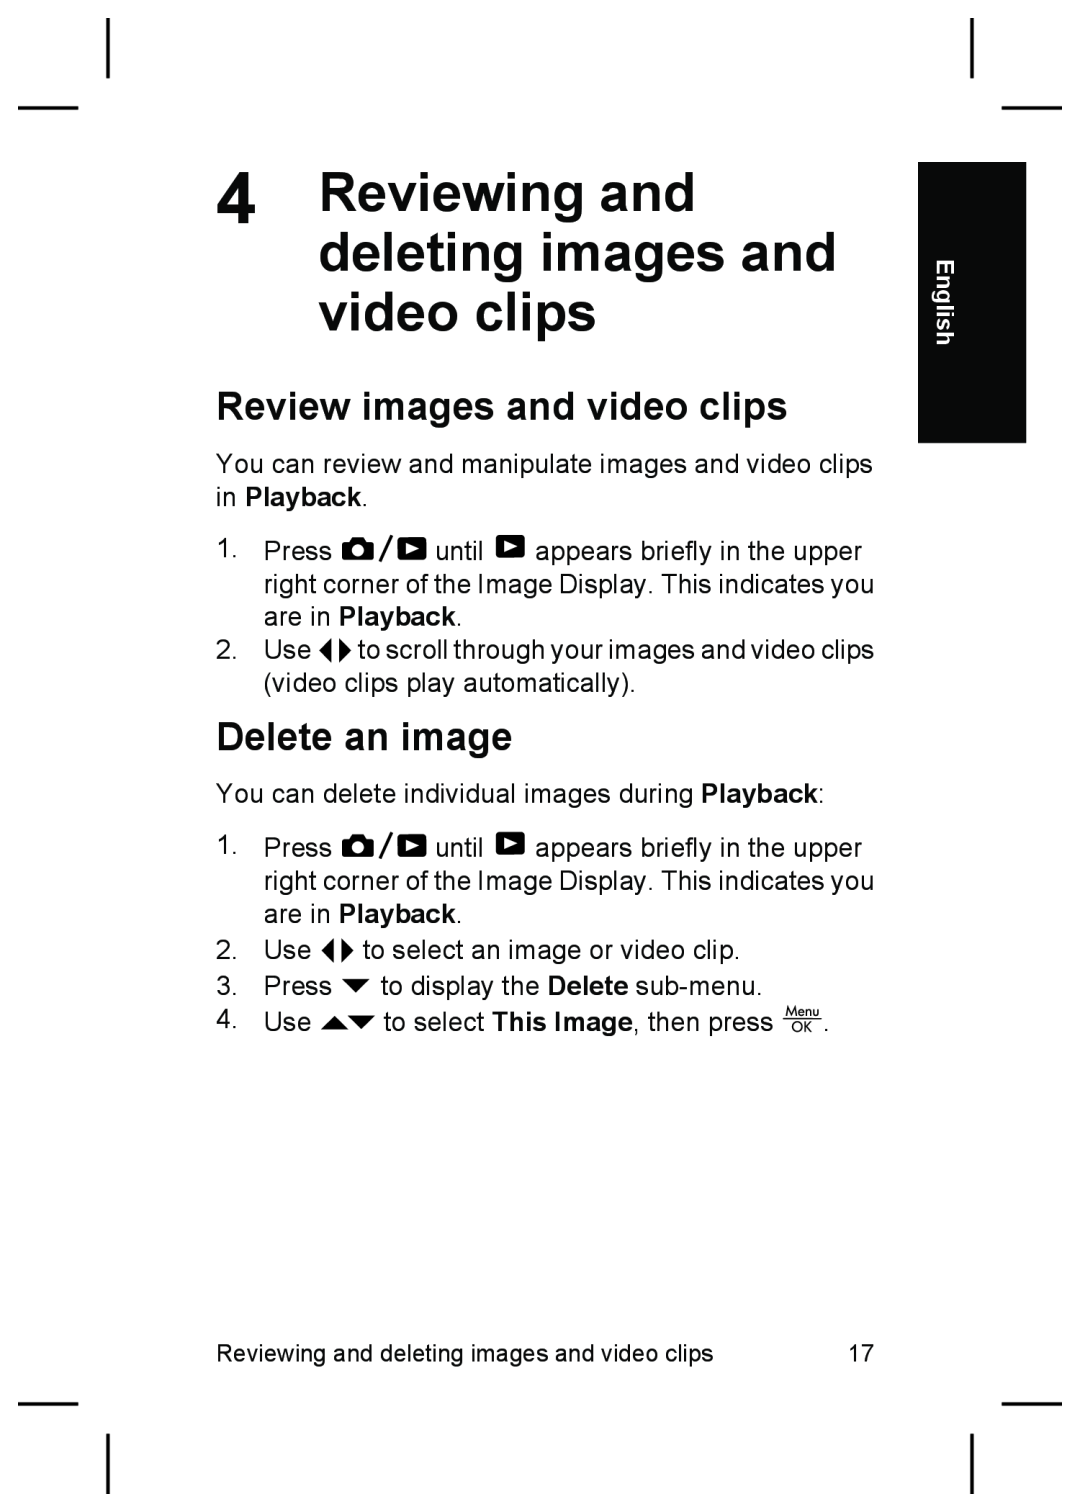 HP R927 manual Reviewing and deleting images and video clips, Review images and video clips, Delete an image 